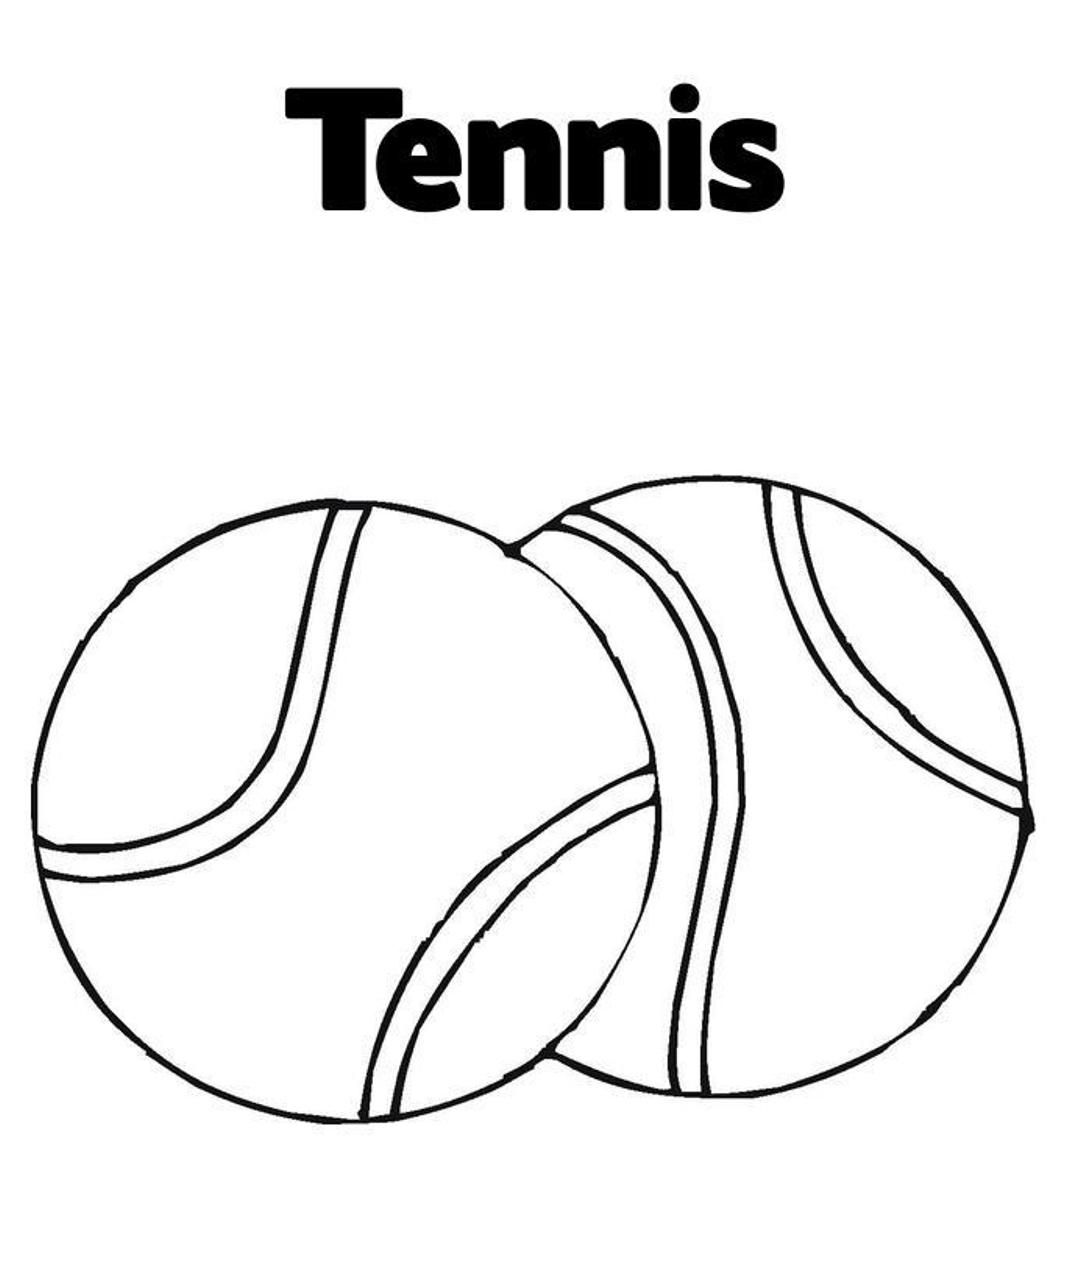 Ball Tennis Coloring Pages | Sport Coloring pages of ...